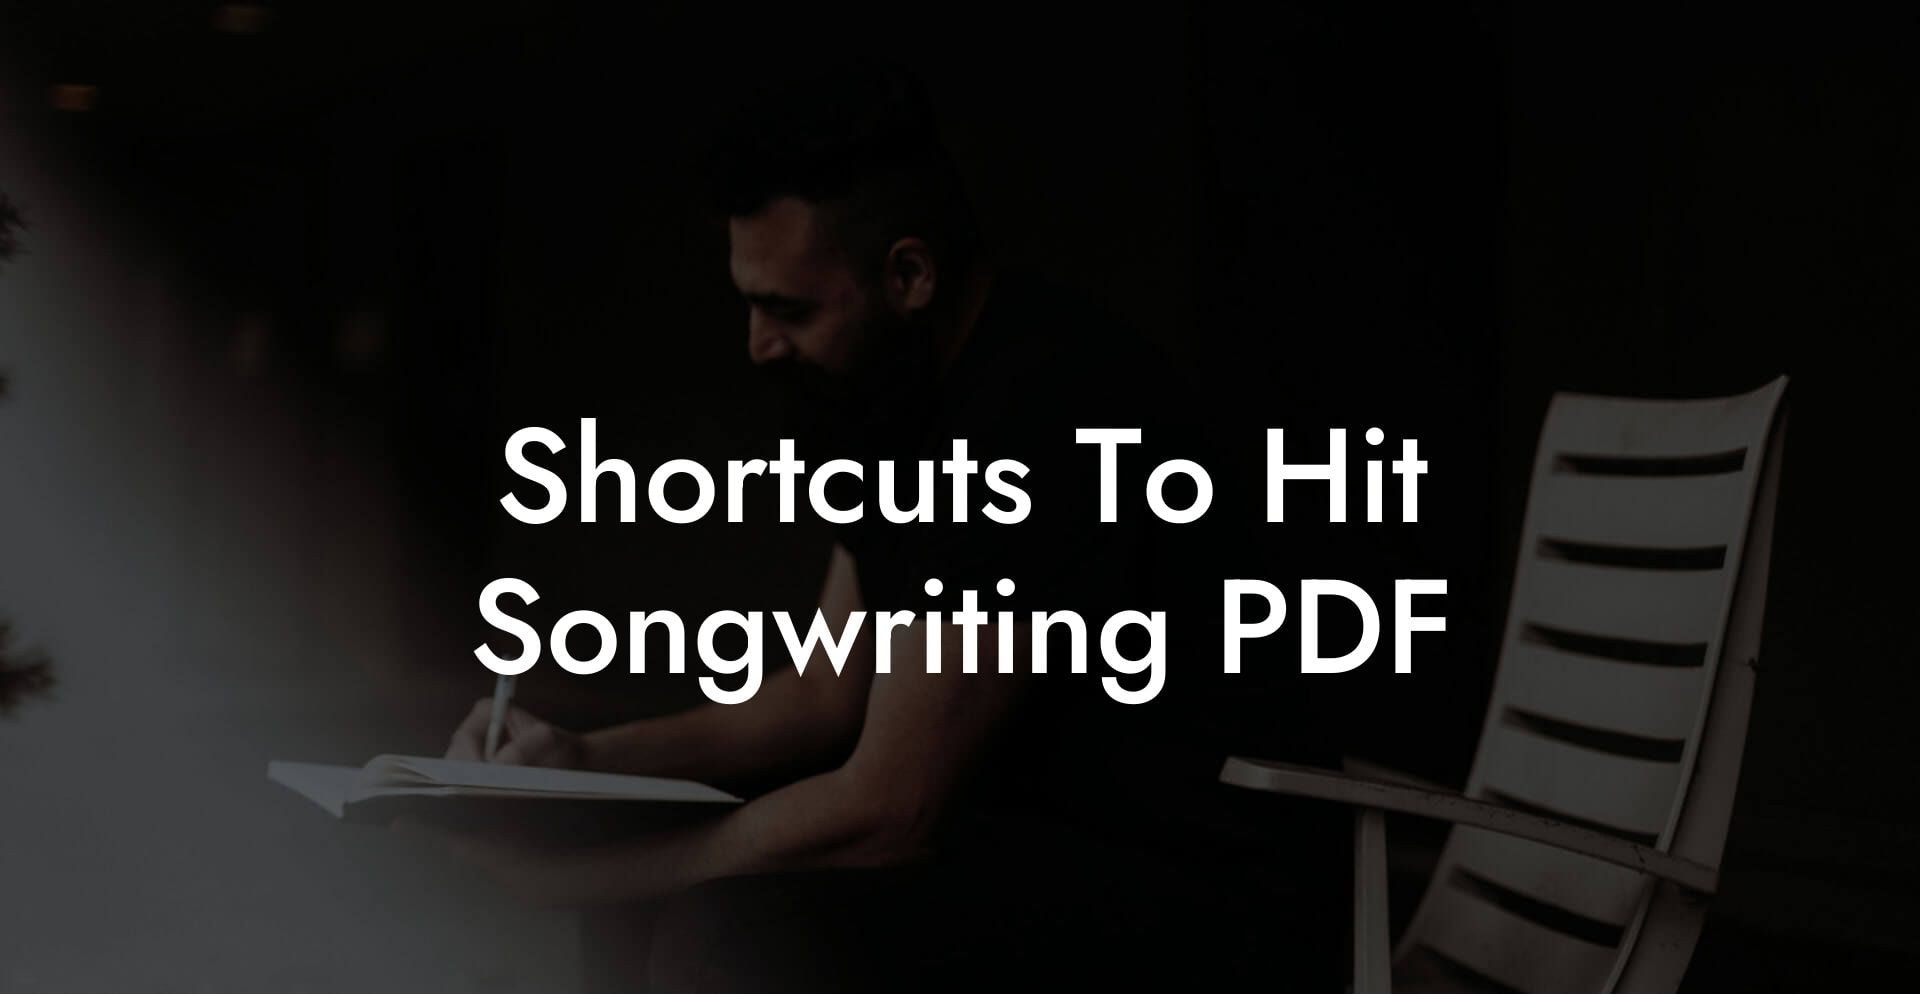 shortcuts to hit songwriting pdf lyric assistant